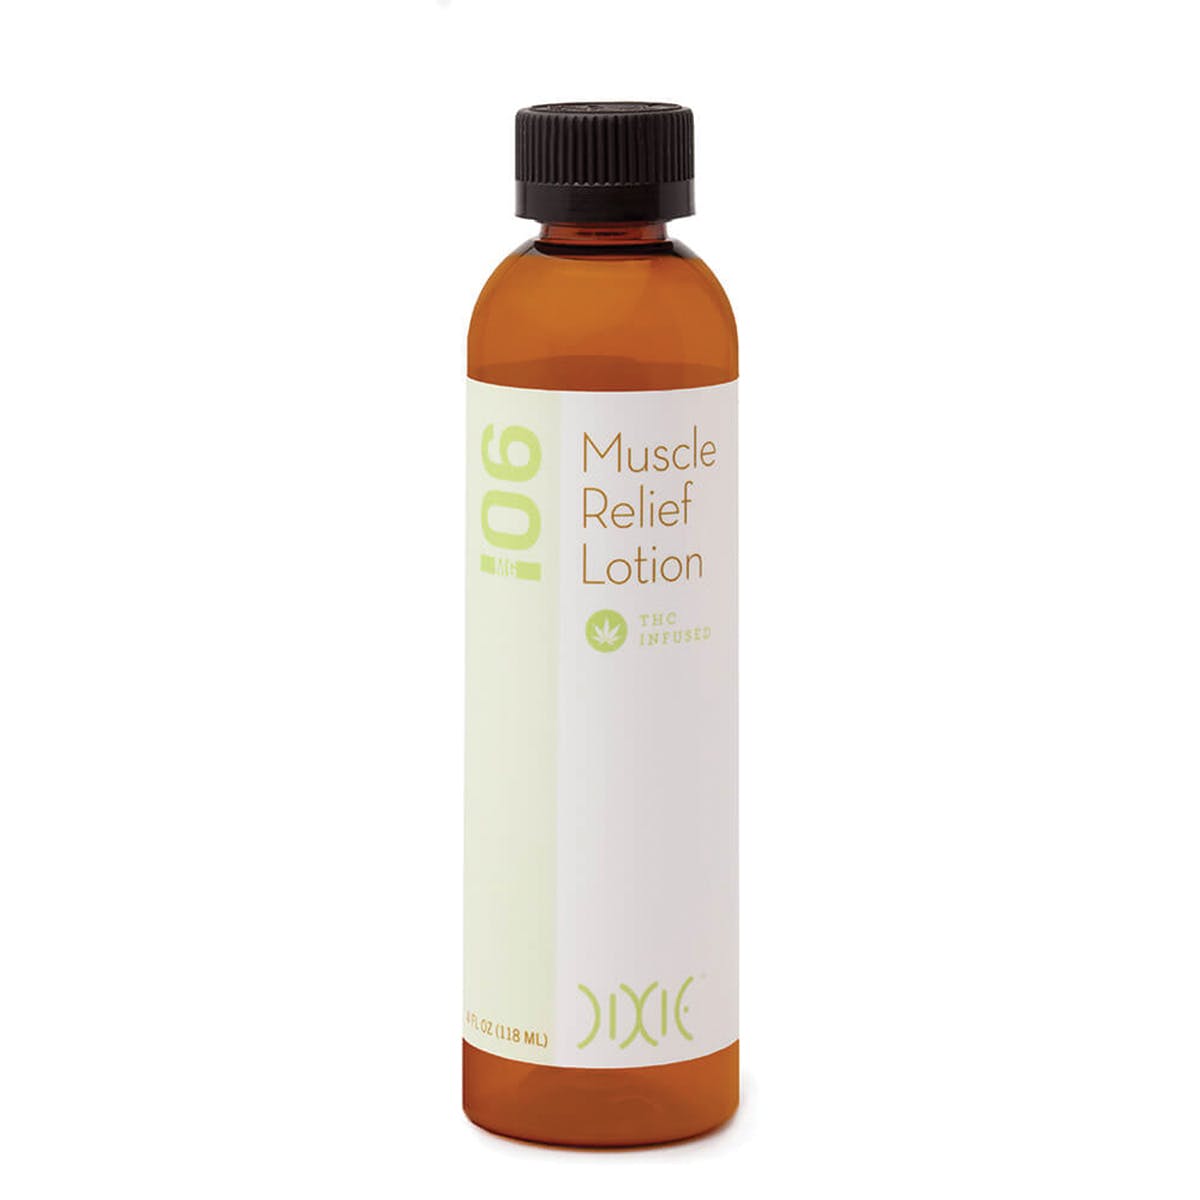 Muscle Relief Lotion 90mg